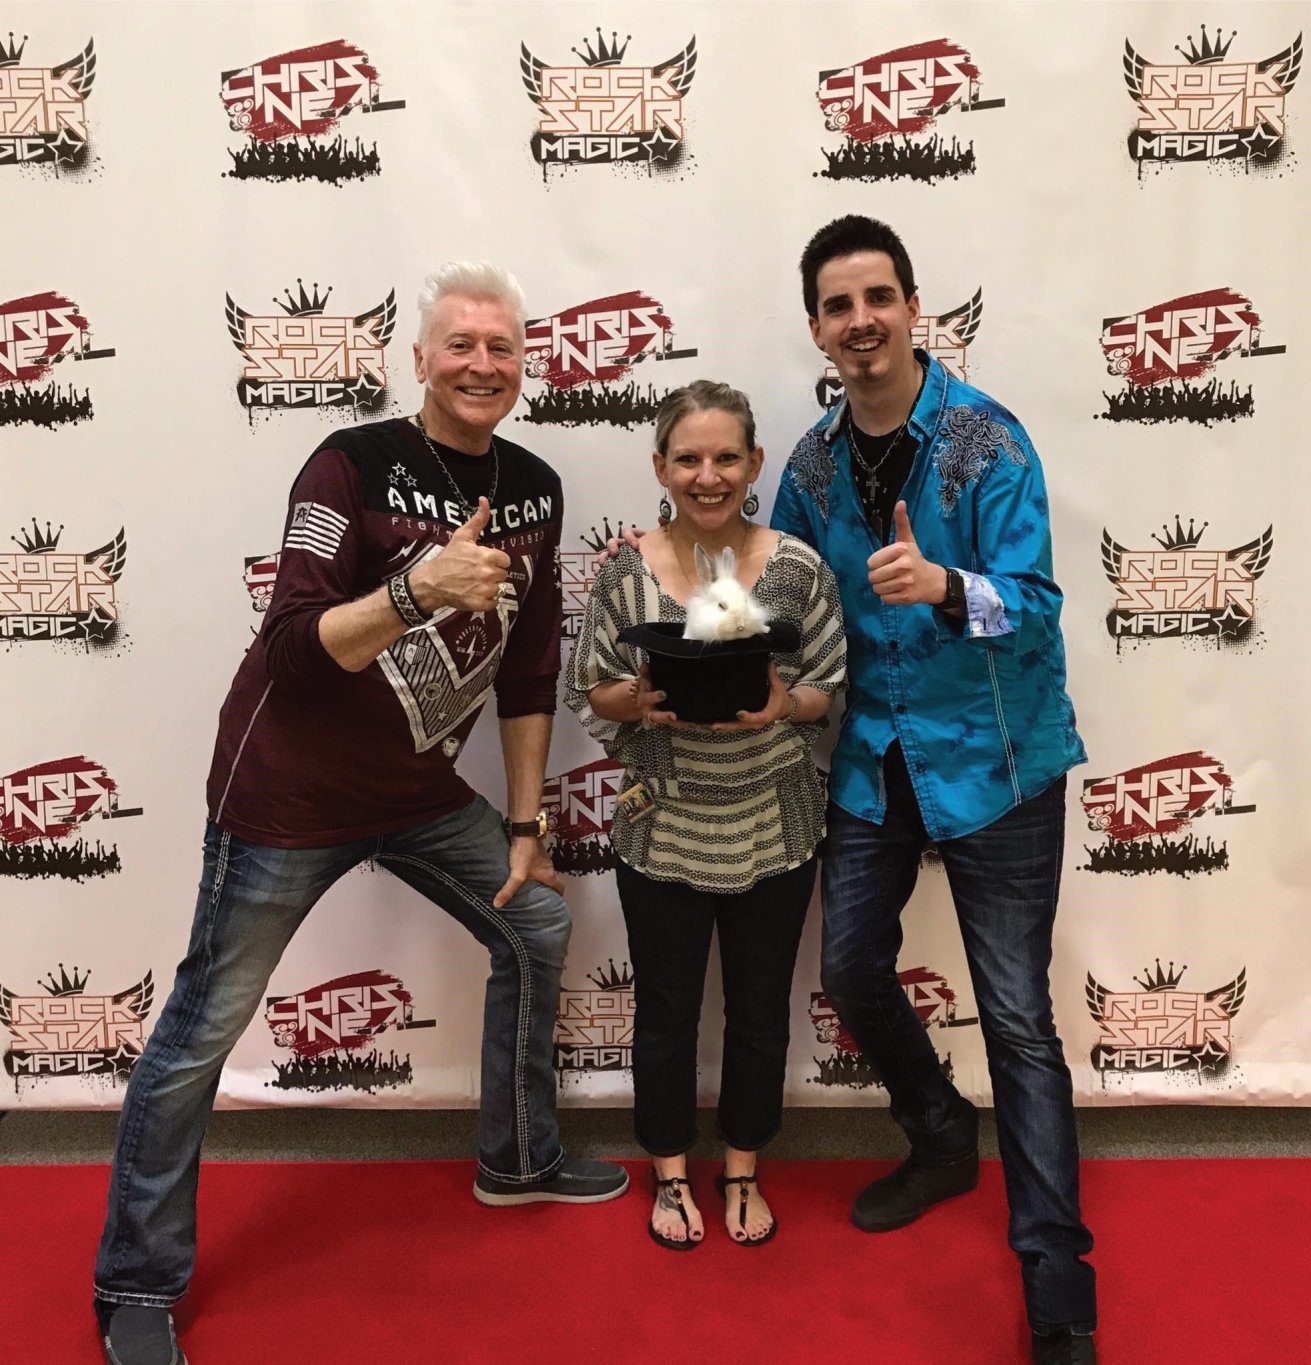 Red Carpet Experience with Rockstar Magicians in Bedford, Virginia.